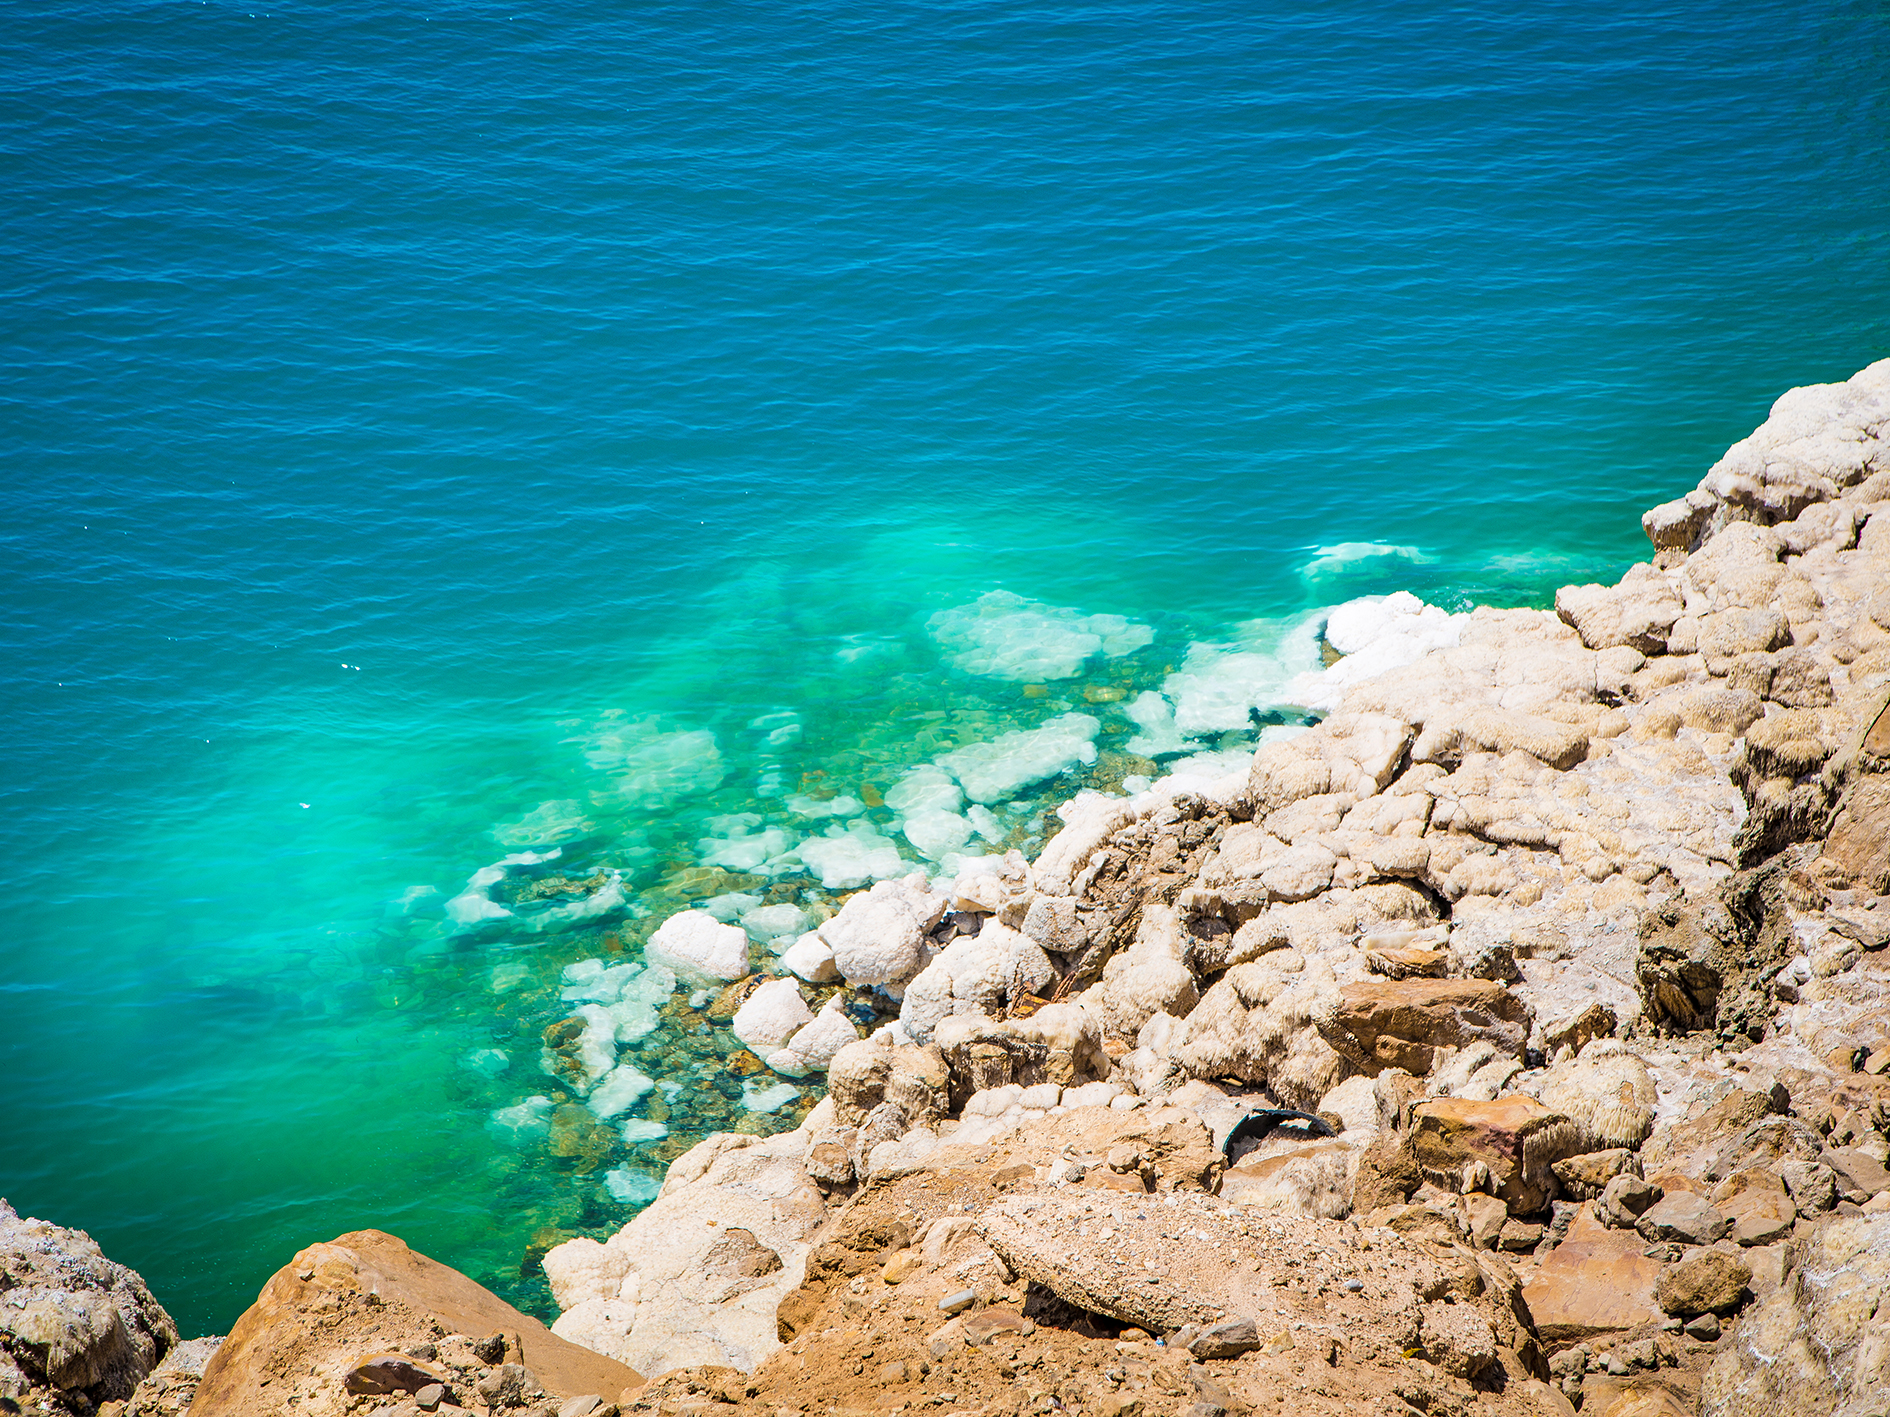 10 Interesting Facts About the Dead Sea - On The Go Tours Blog